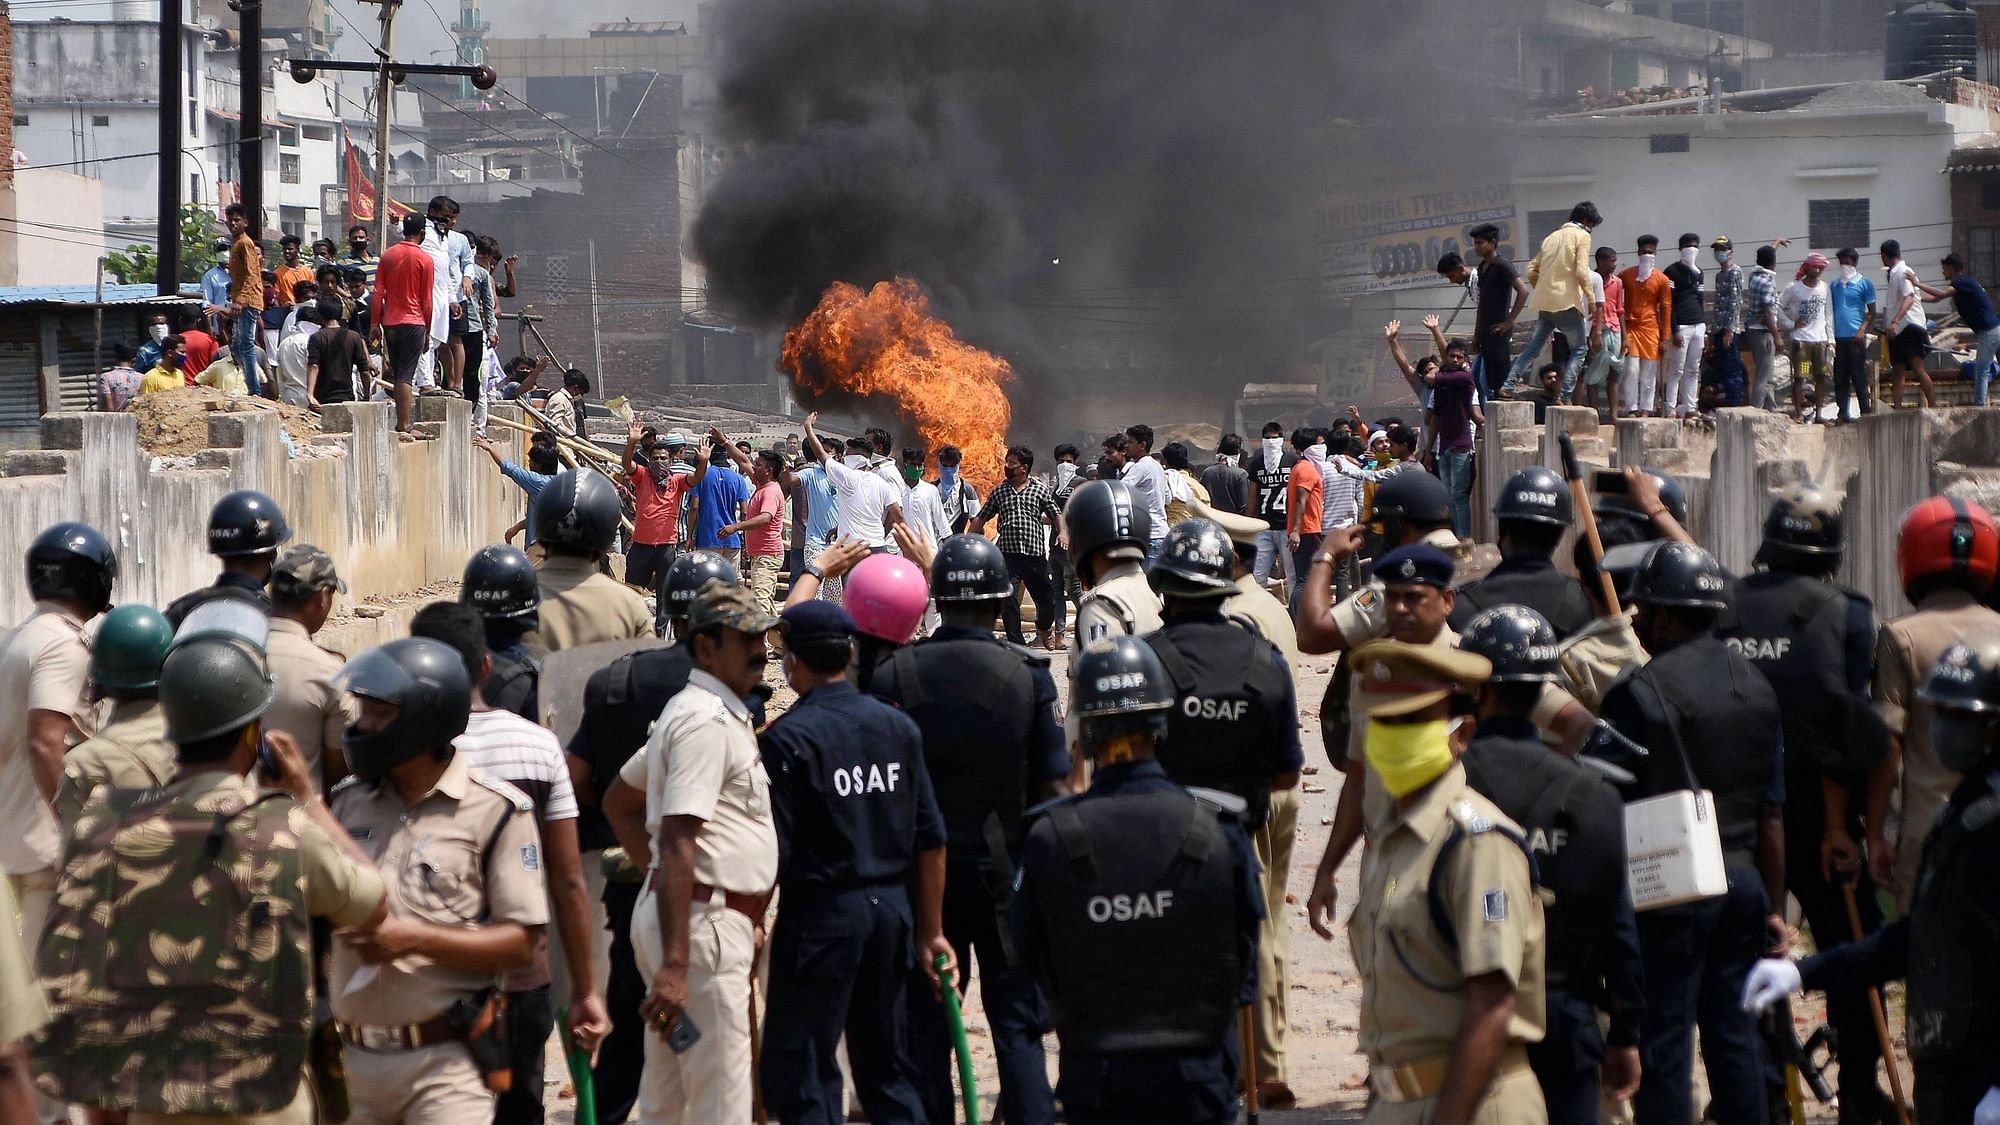 A violent clash broke out between locals and police in Odisha’s Rourkela.